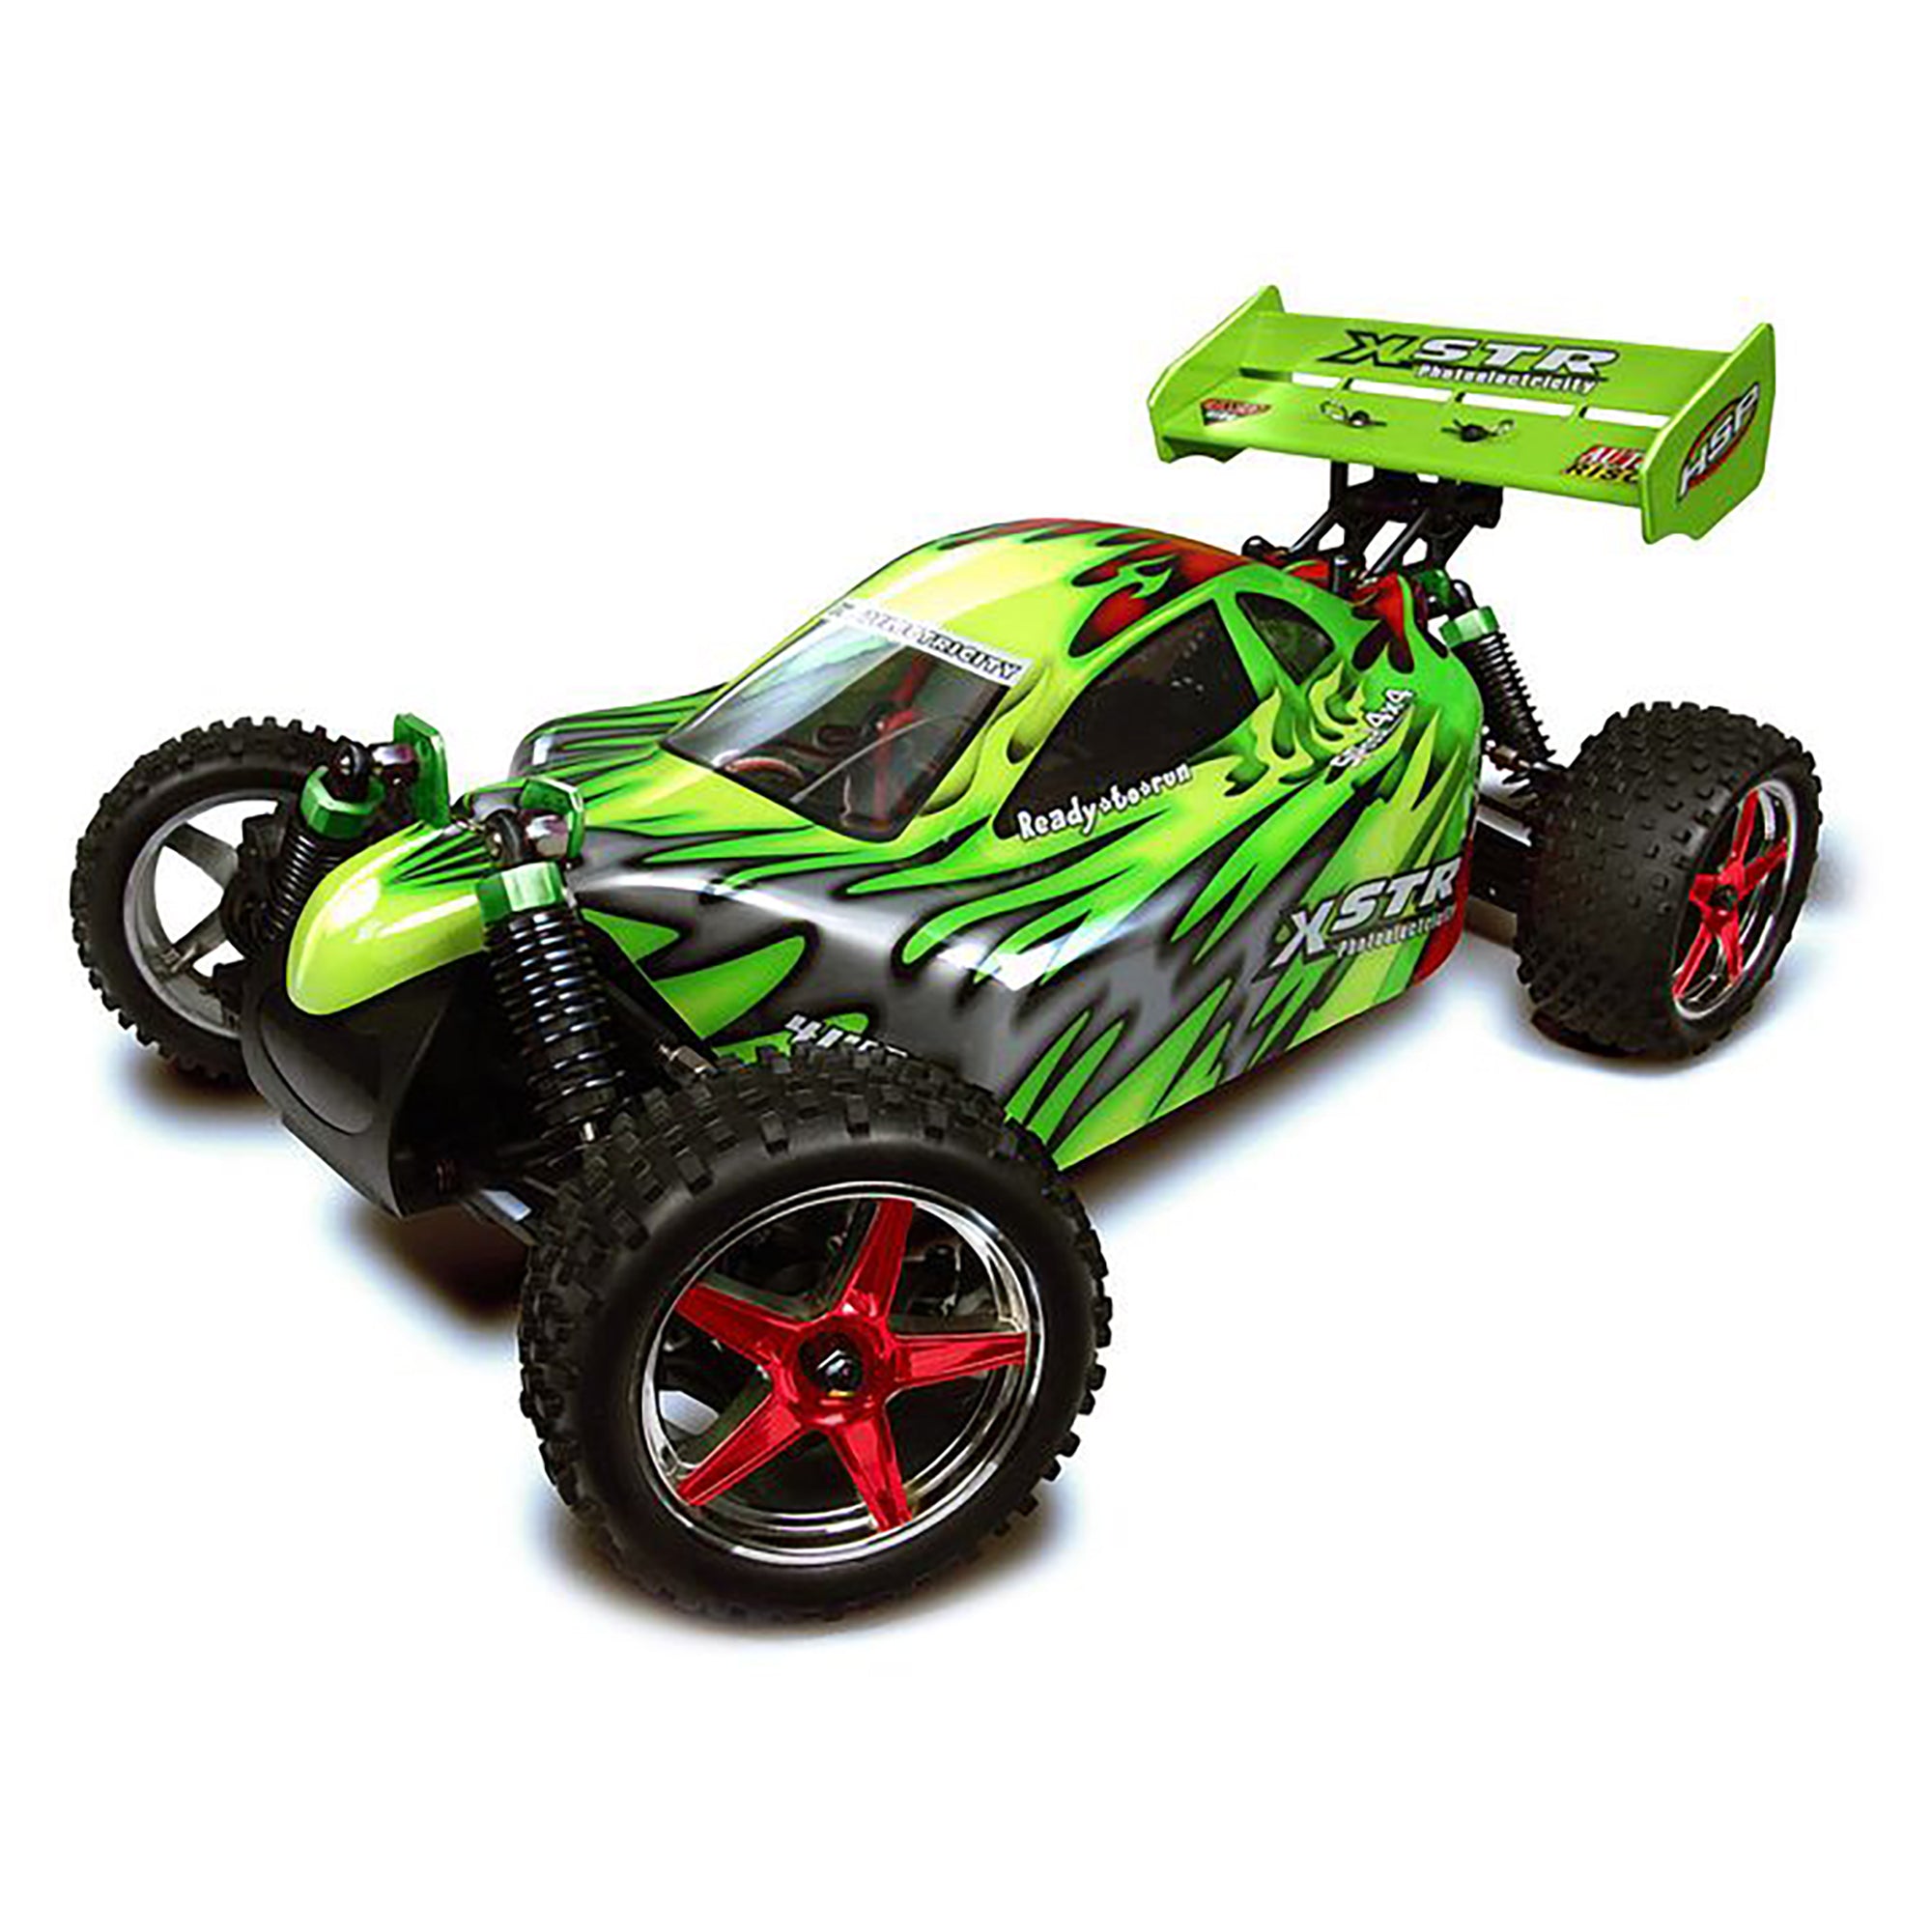 HSP Racing 94106-10707 Mean Green 2.4Ghz 2SP Nitro 4WD Off Road 1/10 Scale RC Buggy